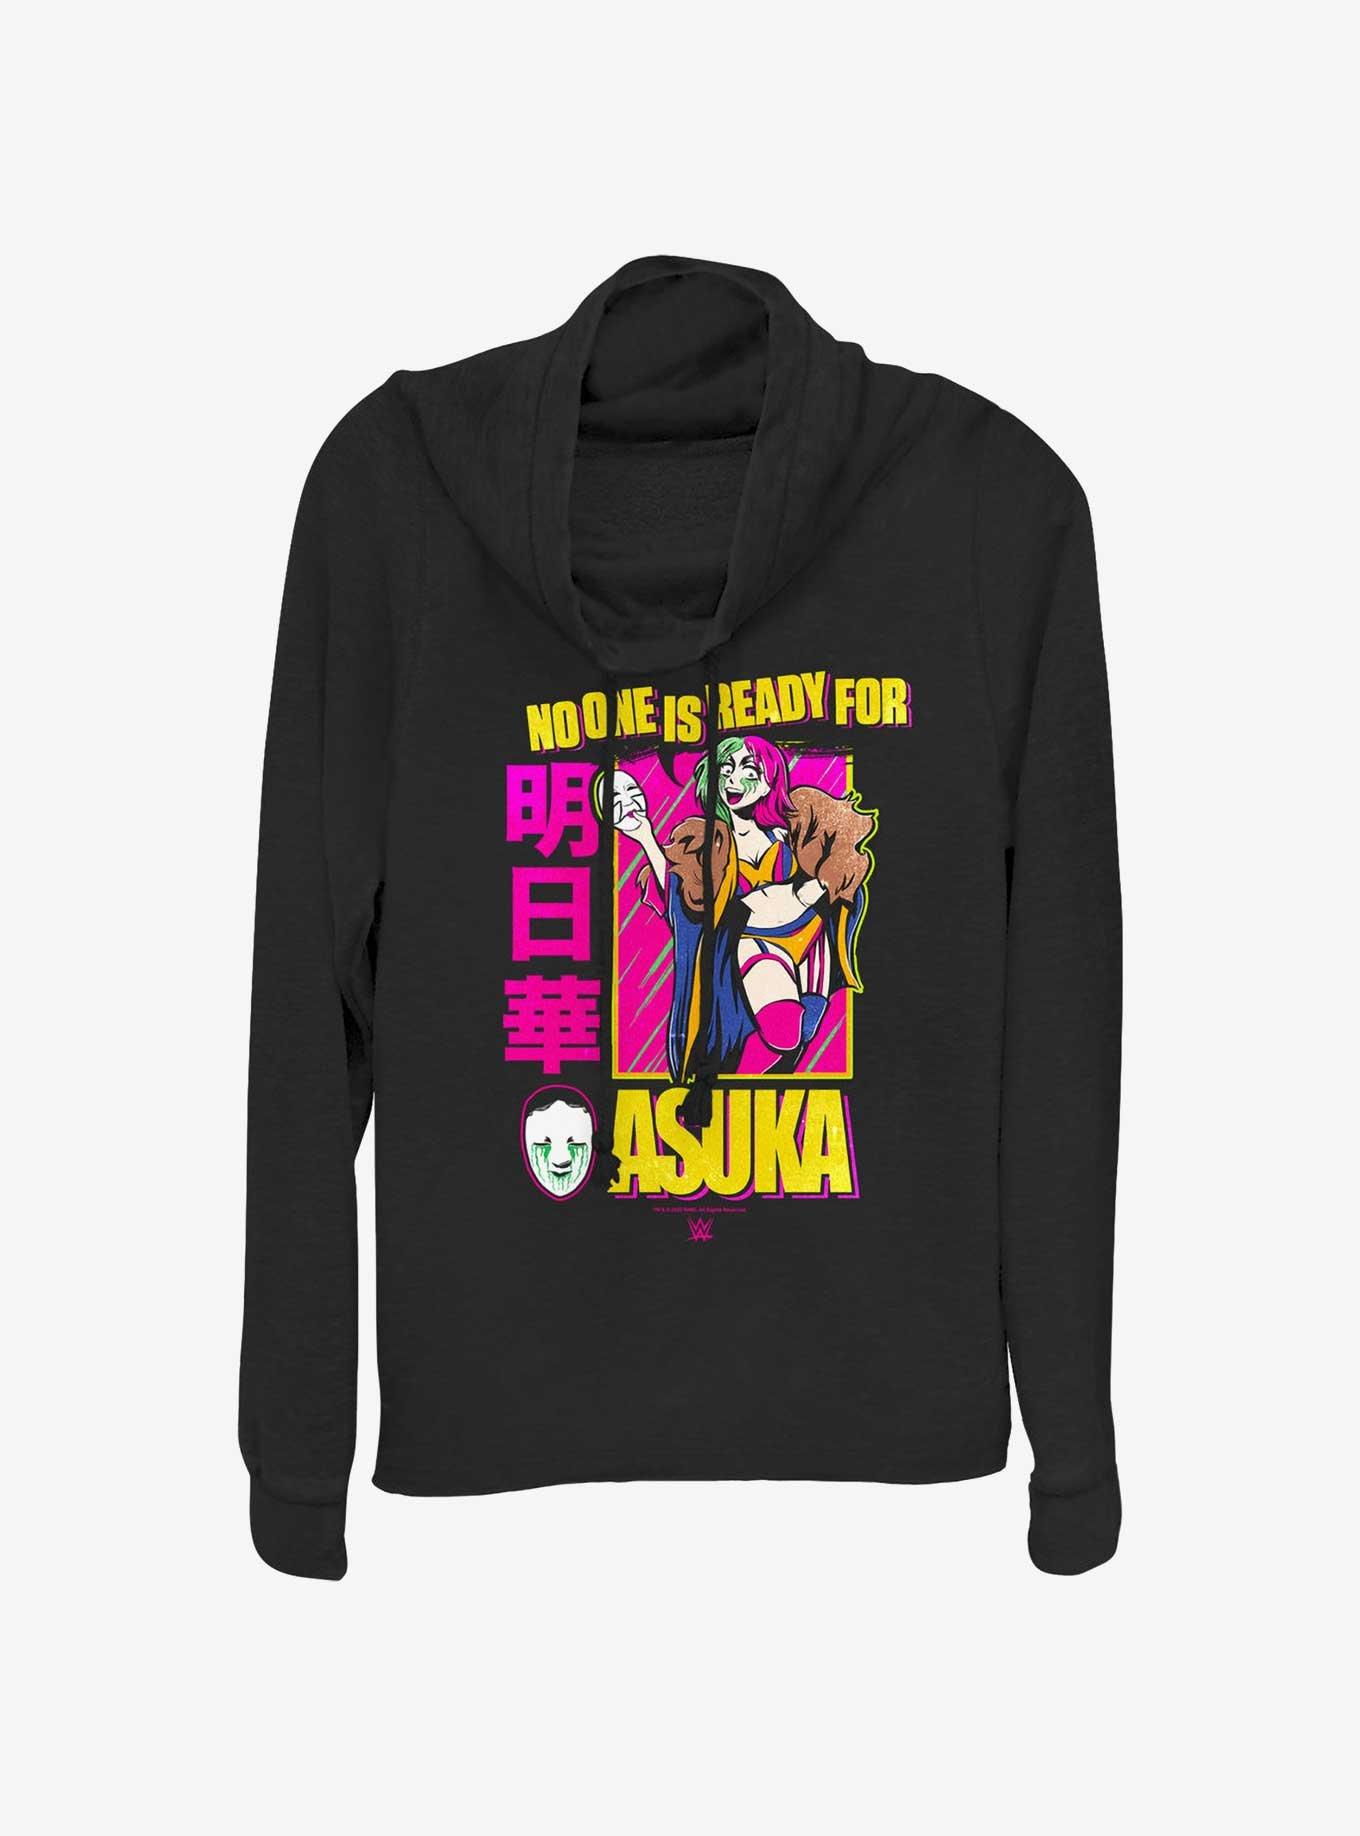 WWE Asuka No One Is Ready Girls Cowl Neck Long-Sleeve Top